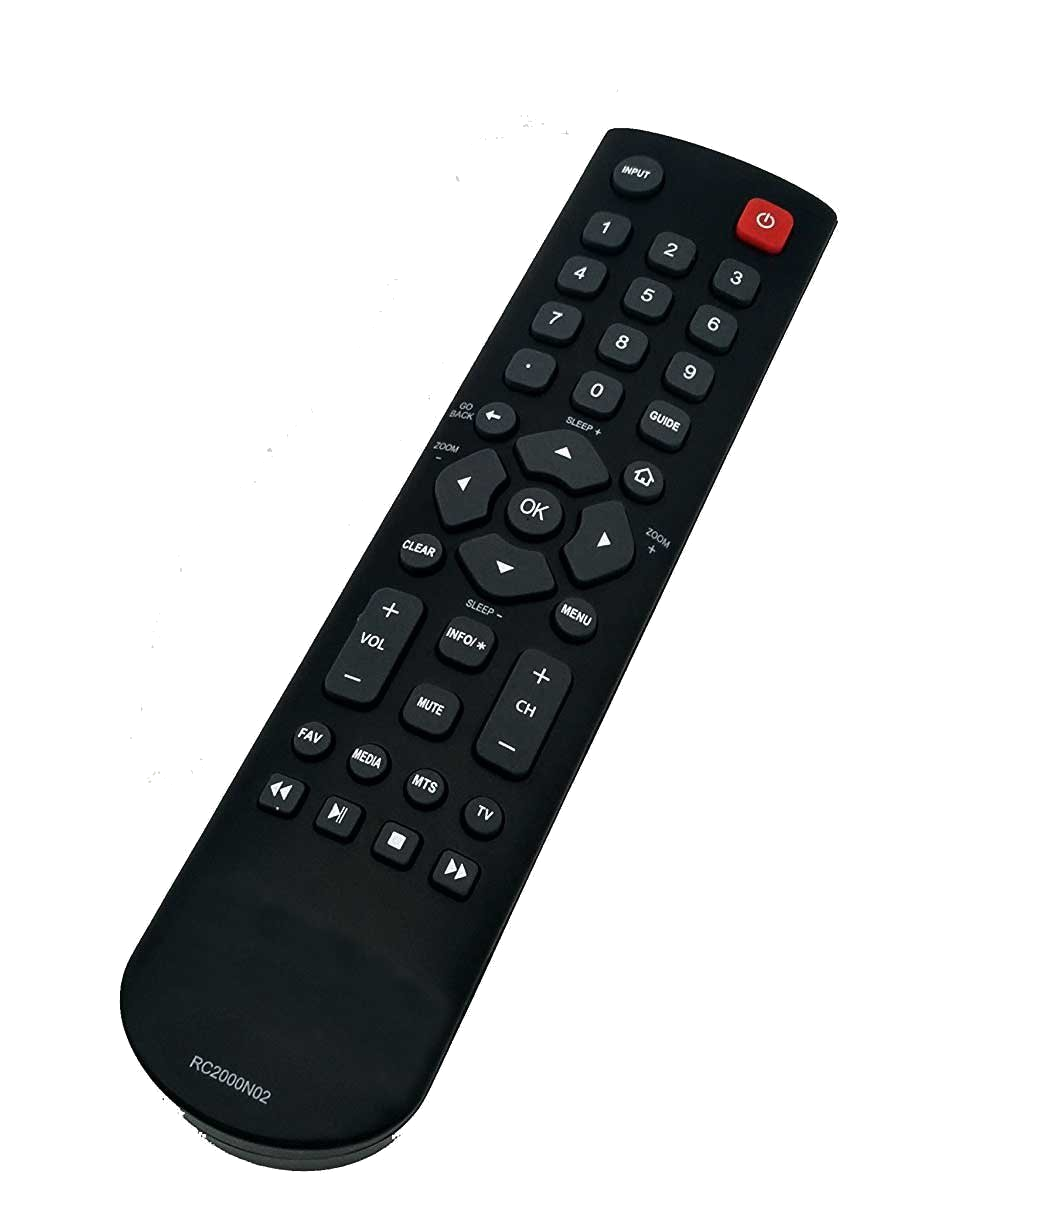 How to fix TCL Android TV Remote Is Not Working, Not Pairing